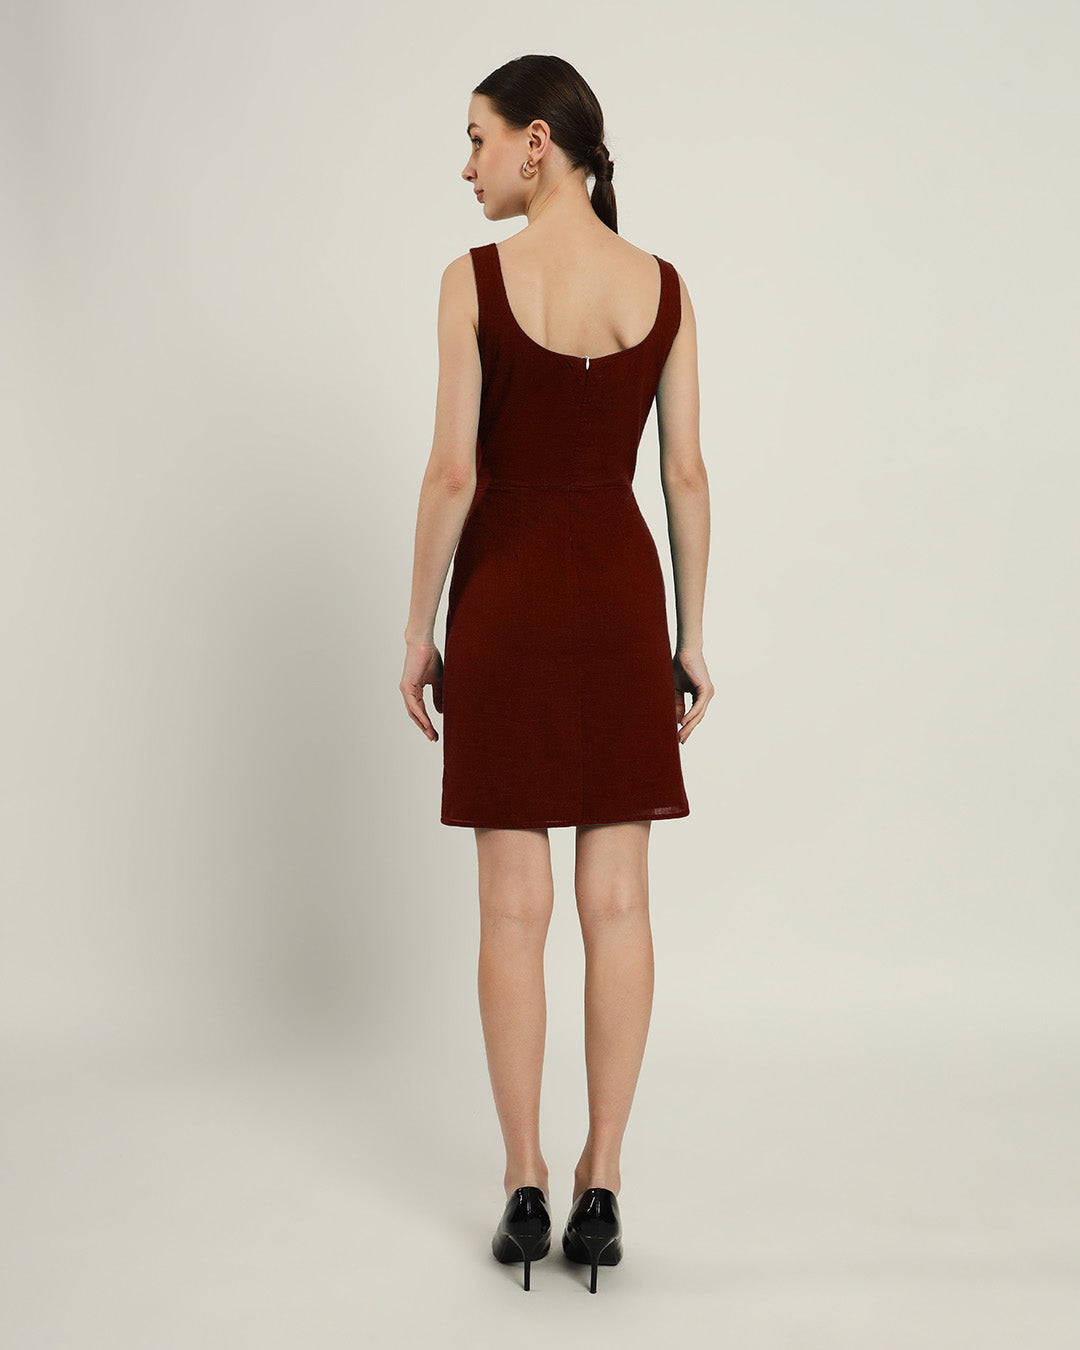 The Cannes Rouge Cotton Dress